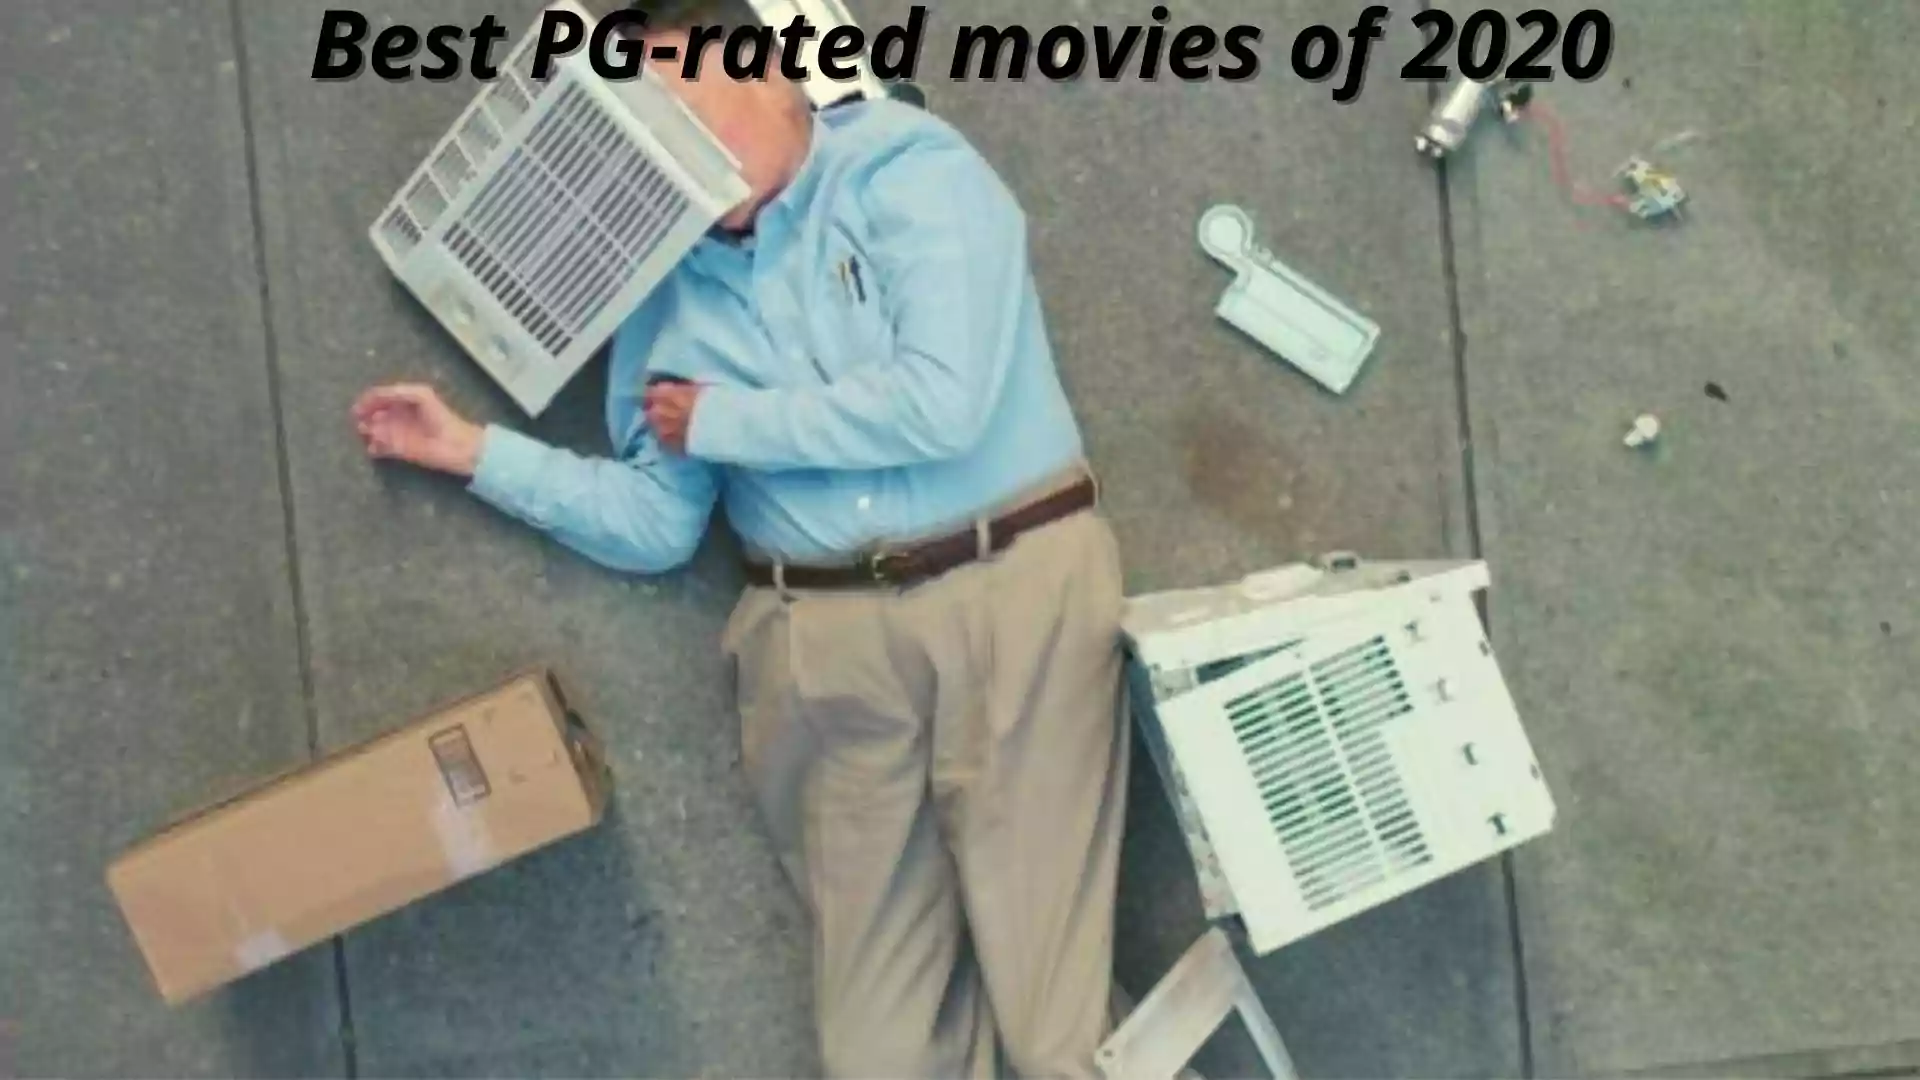 Best PG-rated movies of 2020